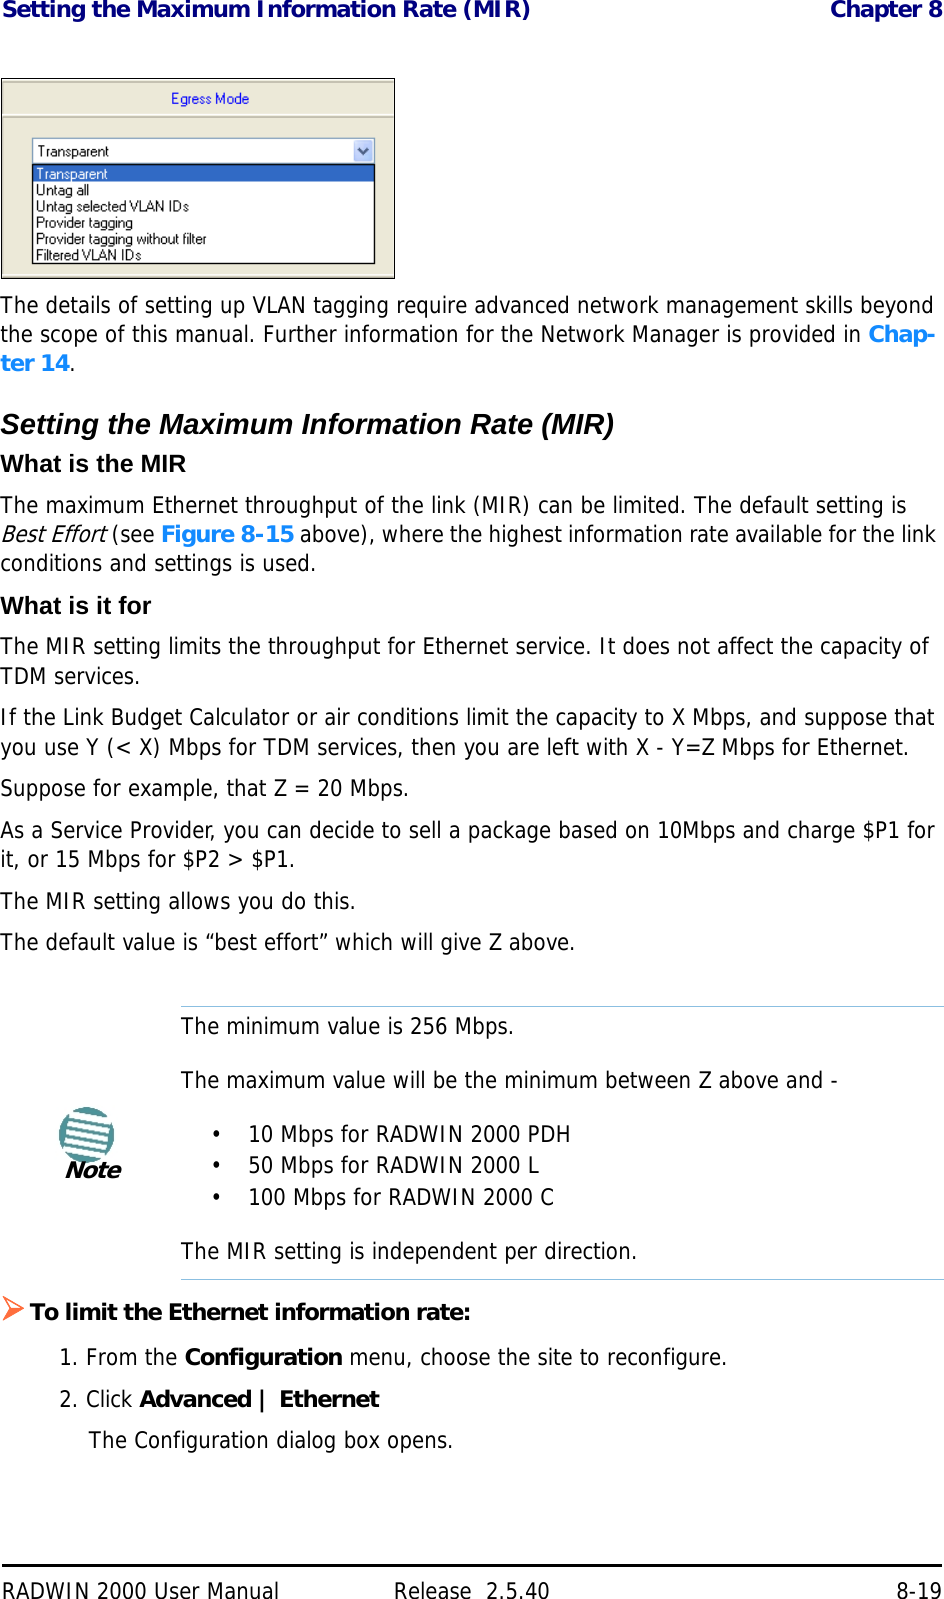 Setting the Maximum Information Rate (MIR) Chapter 8RADWIN 2000 User Manual Release  2.5.40 8-19The details of setting up VLAN tagging require advanced network management skills beyond the scope of this manual. Further information for the Network Manager is provided in Chap-ter 14.Setting the Maximum Information Rate (MIR)What is the MIRThe maximum Ethernet throughput of the link (MIR) can be limited. The default setting is Best Effort (see Figure 8-15 above), where the highest information rate available for the link conditions and settings is used.What is it forThe MIR setting limits the throughput for Ethernet service. It does not affect the capacity of TDM services.If the Link Budget Calculator or air conditions limit the capacity to X Mbps, and suppose that you use Y (&lt; X) Mbps for TDM services, then you are left with X - Y=Z Mbps for Ethernet. Suppose for example, that Z = 20 Mbps.As a Service Provider, you can decide to sell a package based on 10Mbps and charge $P1 for it, or 15 Mbps for $P2 &gt; $P1.The MIR setting allows you do this.The default value is “best effort” which will give Z above.To limit the Ethernet information rate:1. From the Configuration menu, choose the site to reconfigure.2. Click Advanced | EthernetThe Configuration dialog box opens.NoteThe minimum value is 256 Mbps.The maximum value will be the minimum between Z above and -• 10 Mbps for RADWIN 2000 PDH• 50 Mbps for RADWIN 2000 L• 100 Mbps for RADWIN 2000 CThe MIR setting is independent per direction.